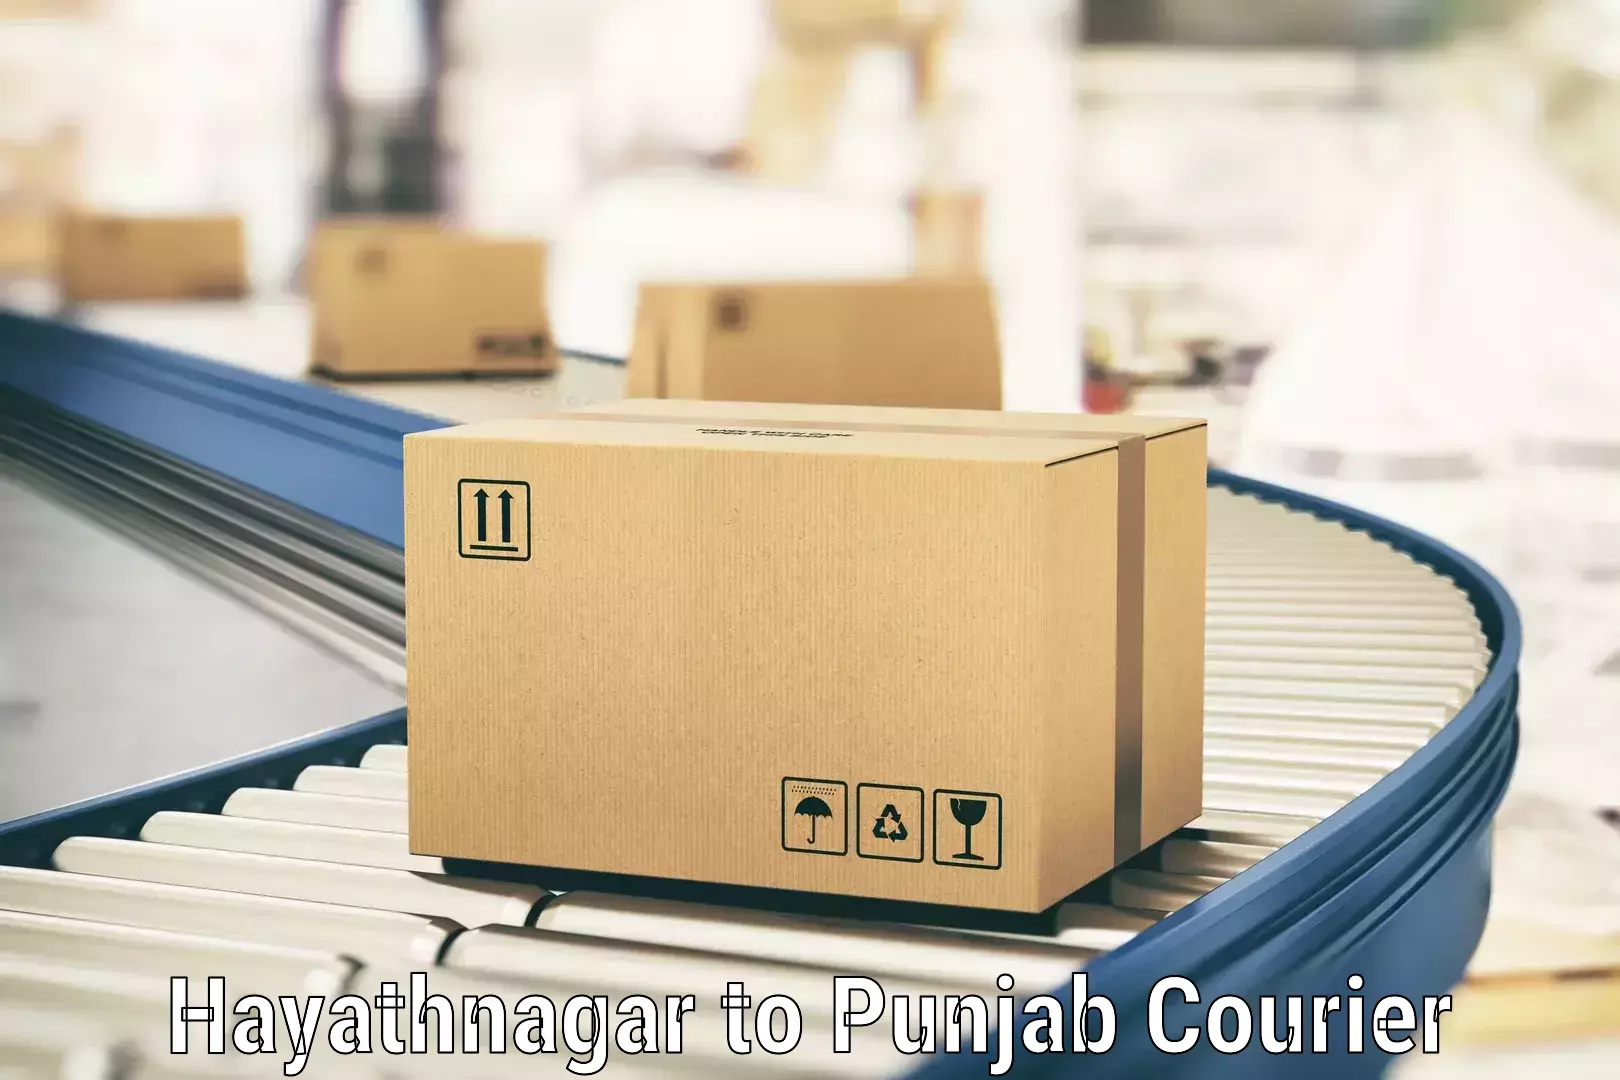 Professional courier services Hayathnagar to Khanna